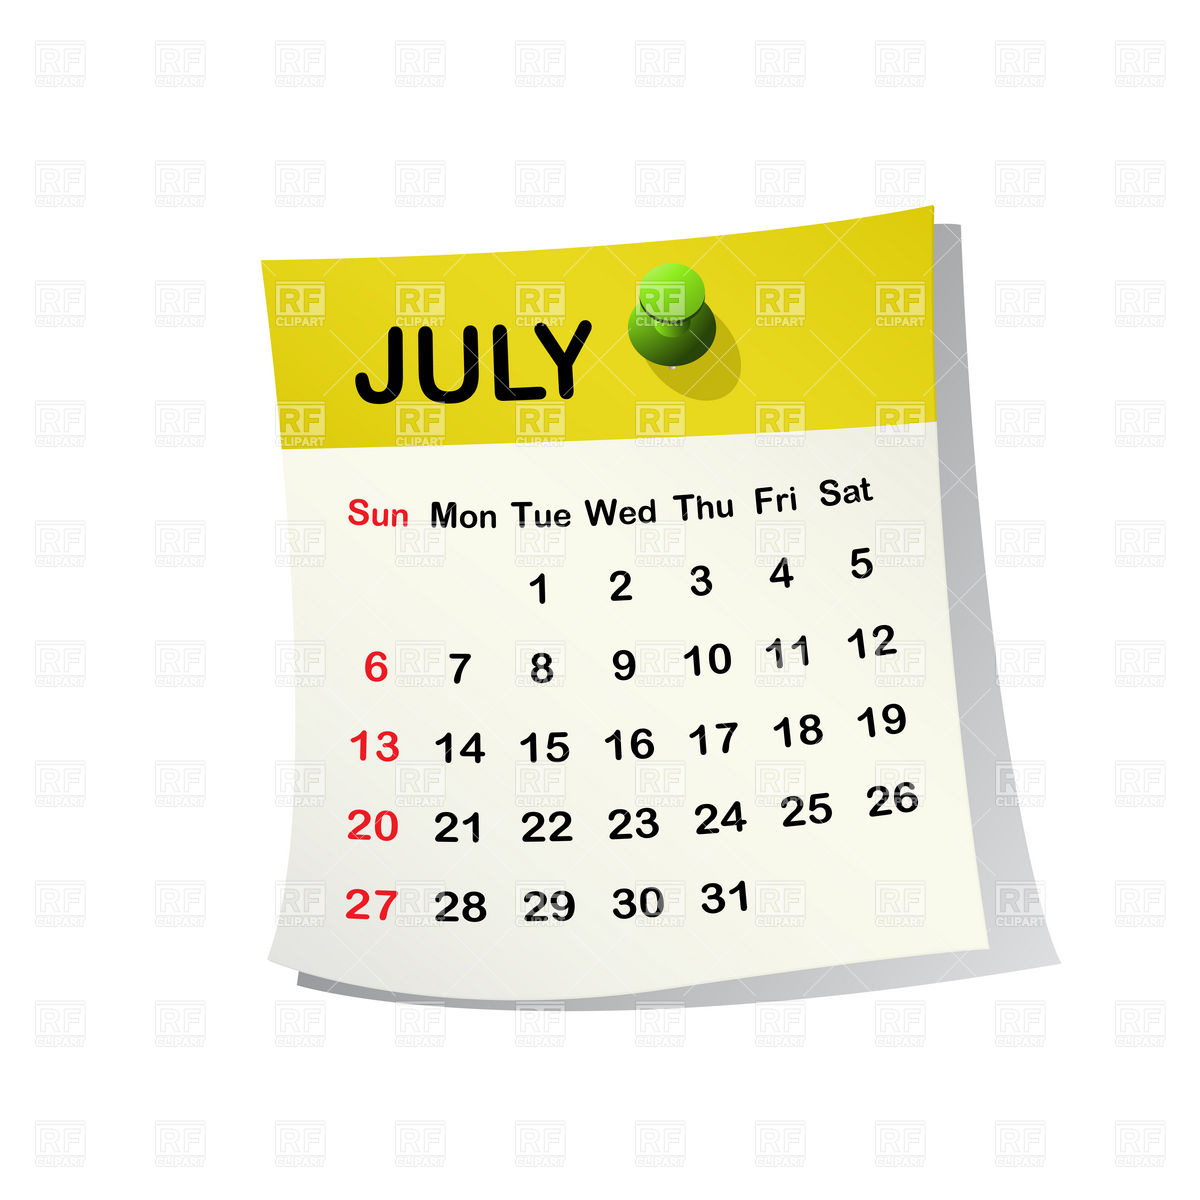 July 2014 Month Calendar 20537 Calendars Layouts Download Royalty